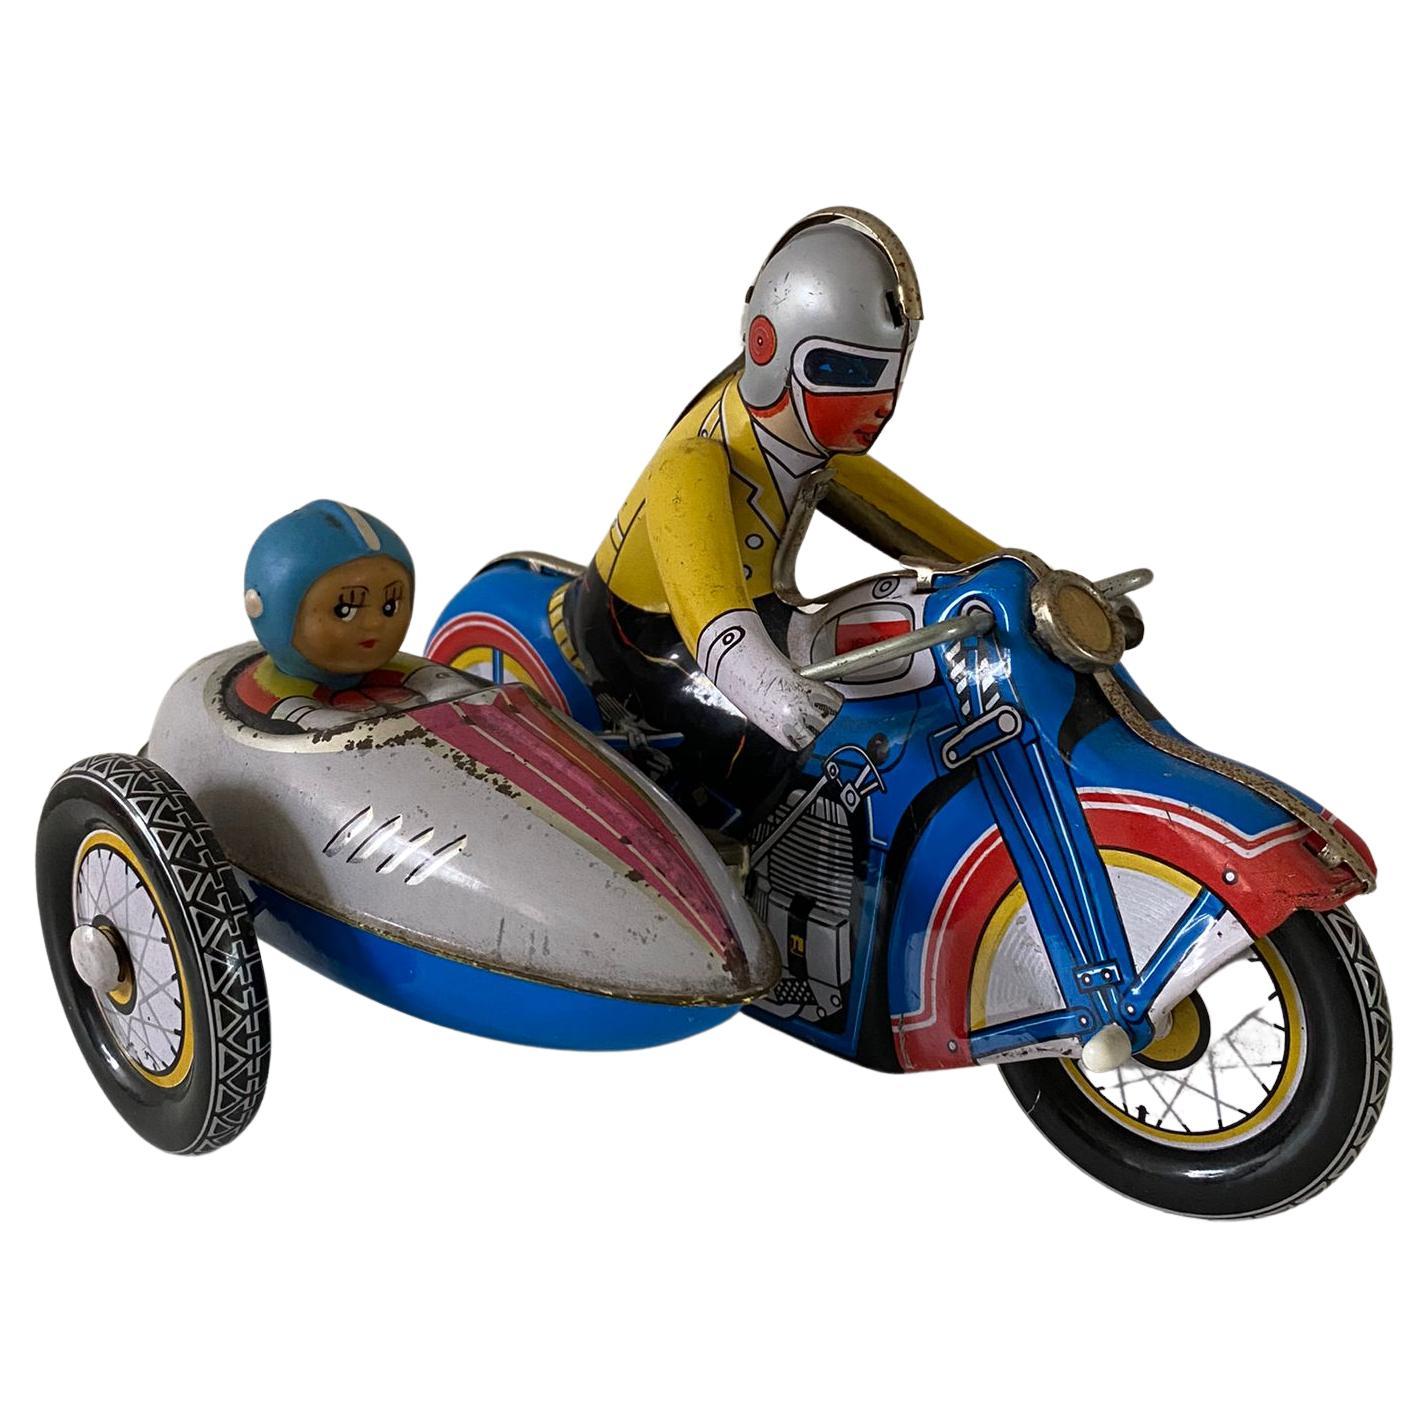 Vintage Wind-Up Tin Toy Motorcycle with Co-Driver and Key